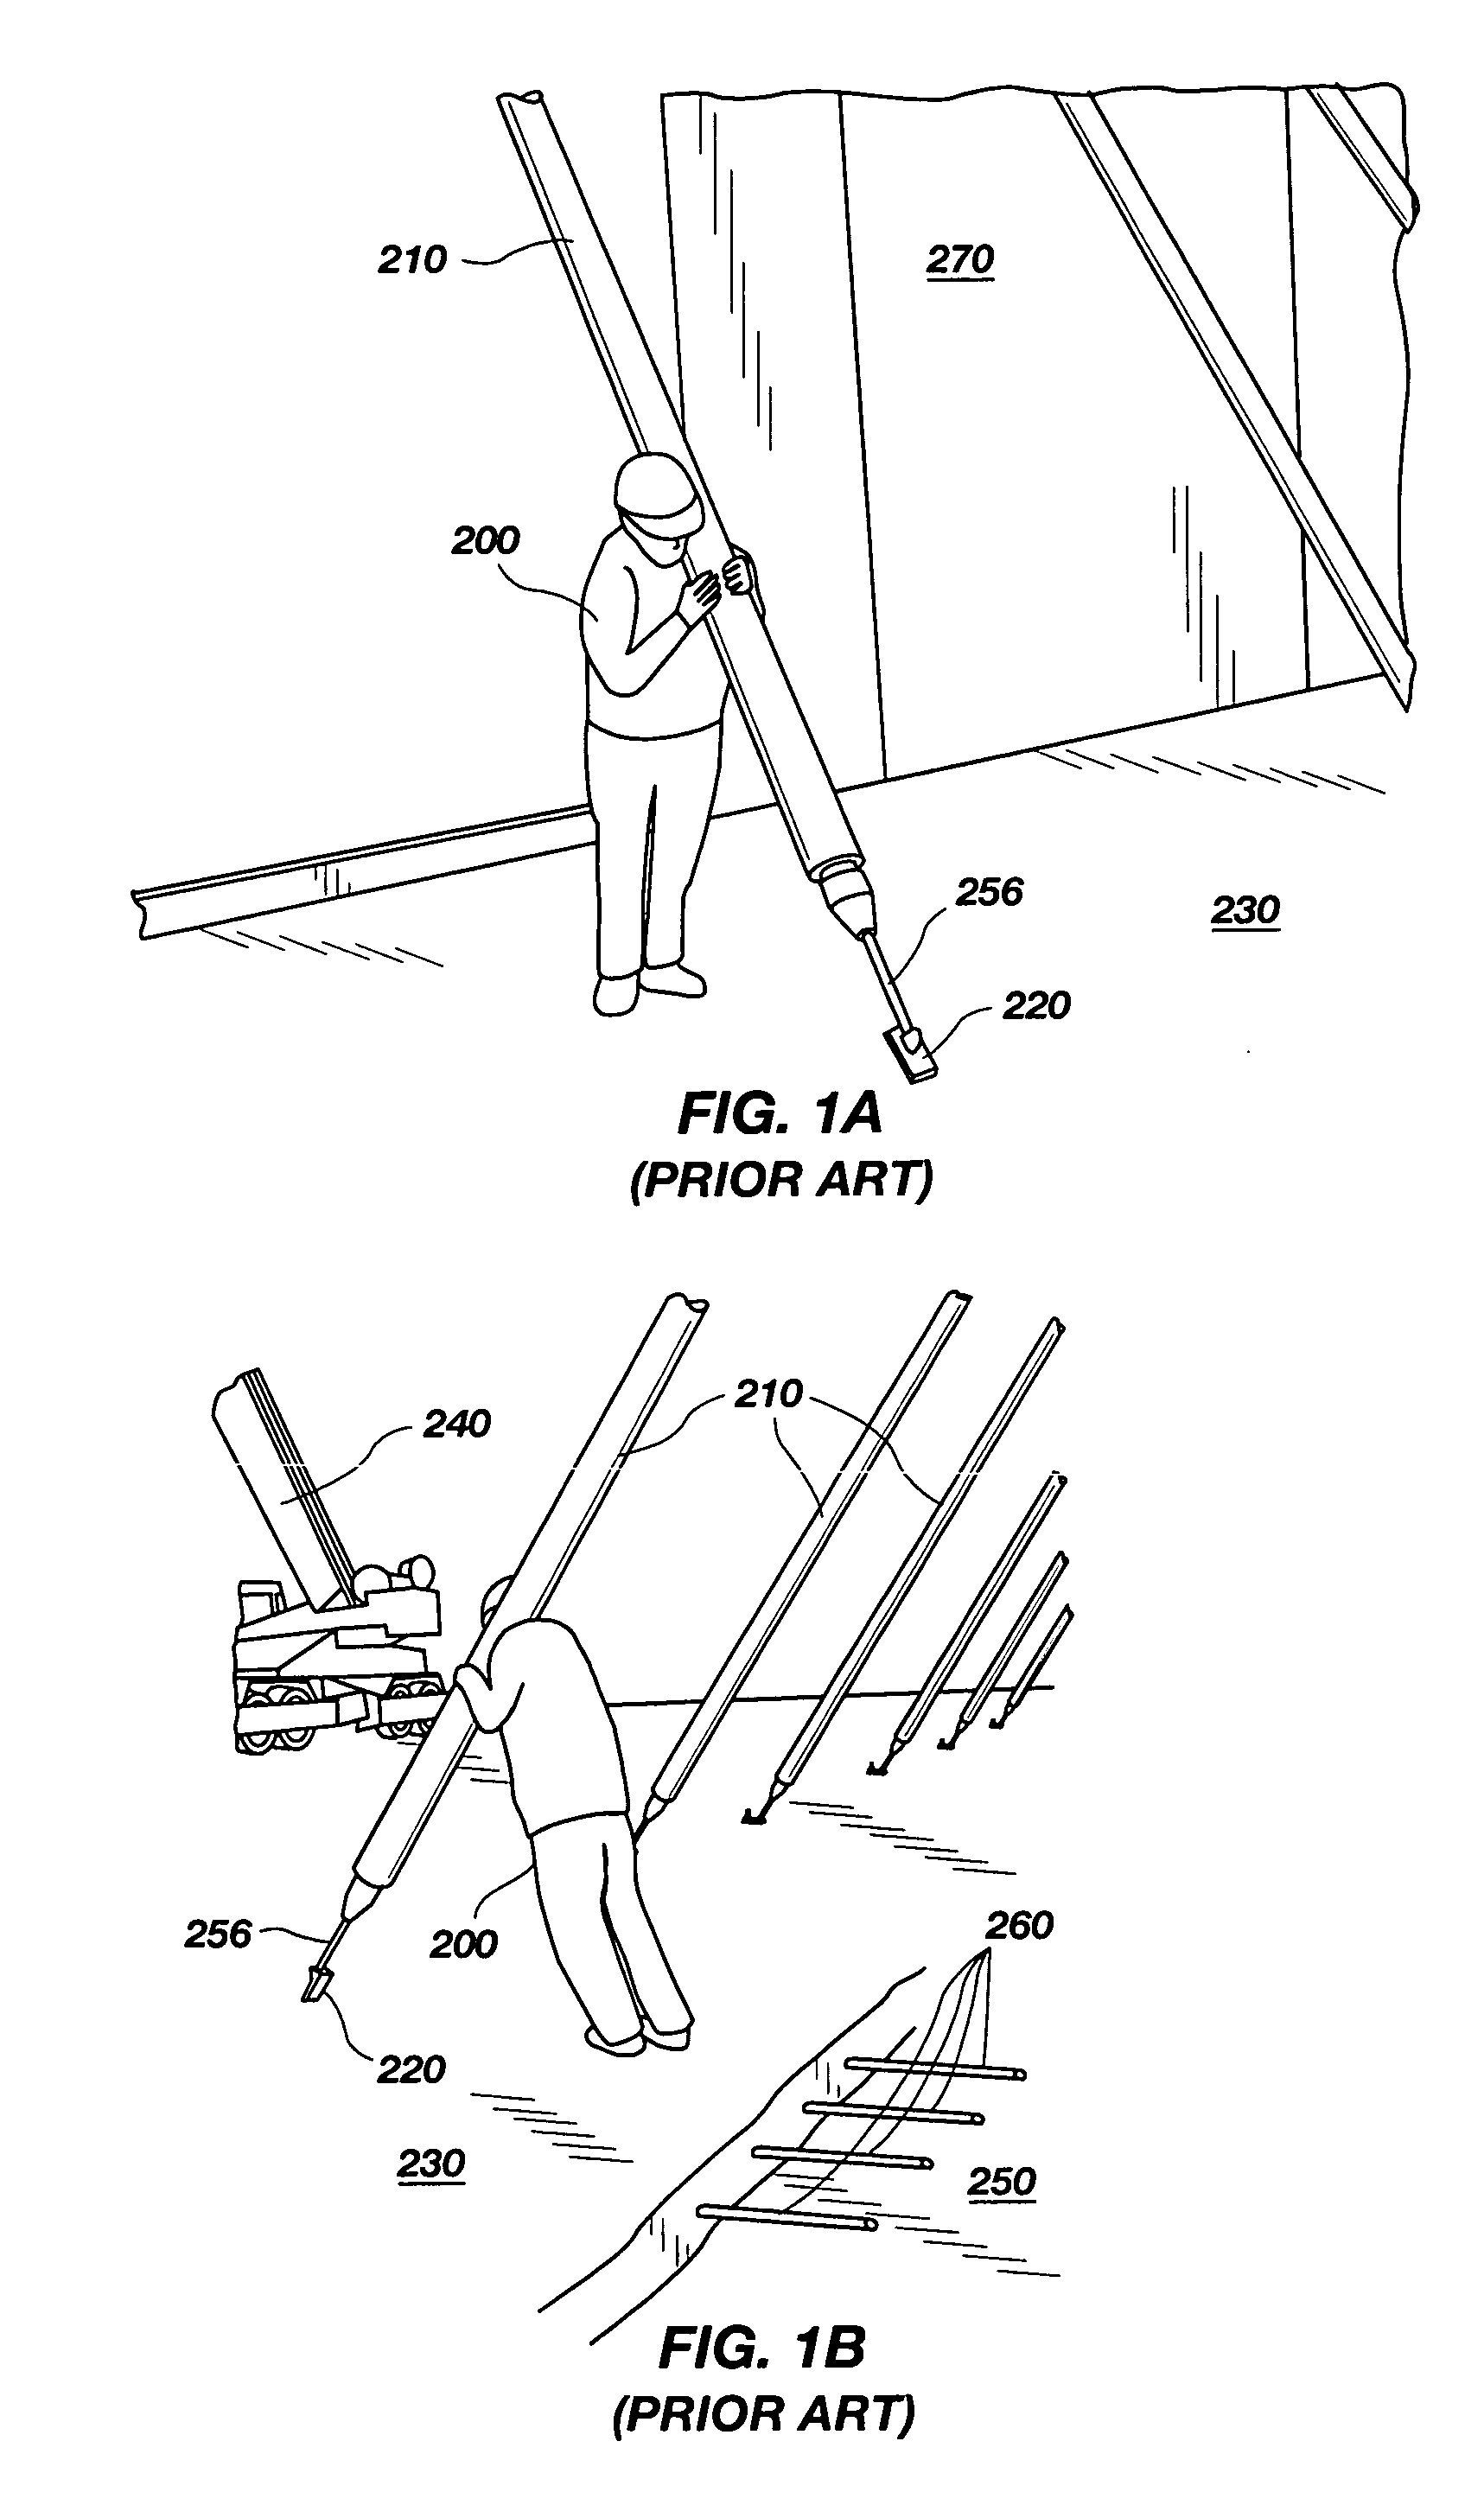 Tilt-up wall brace dolly and method of use